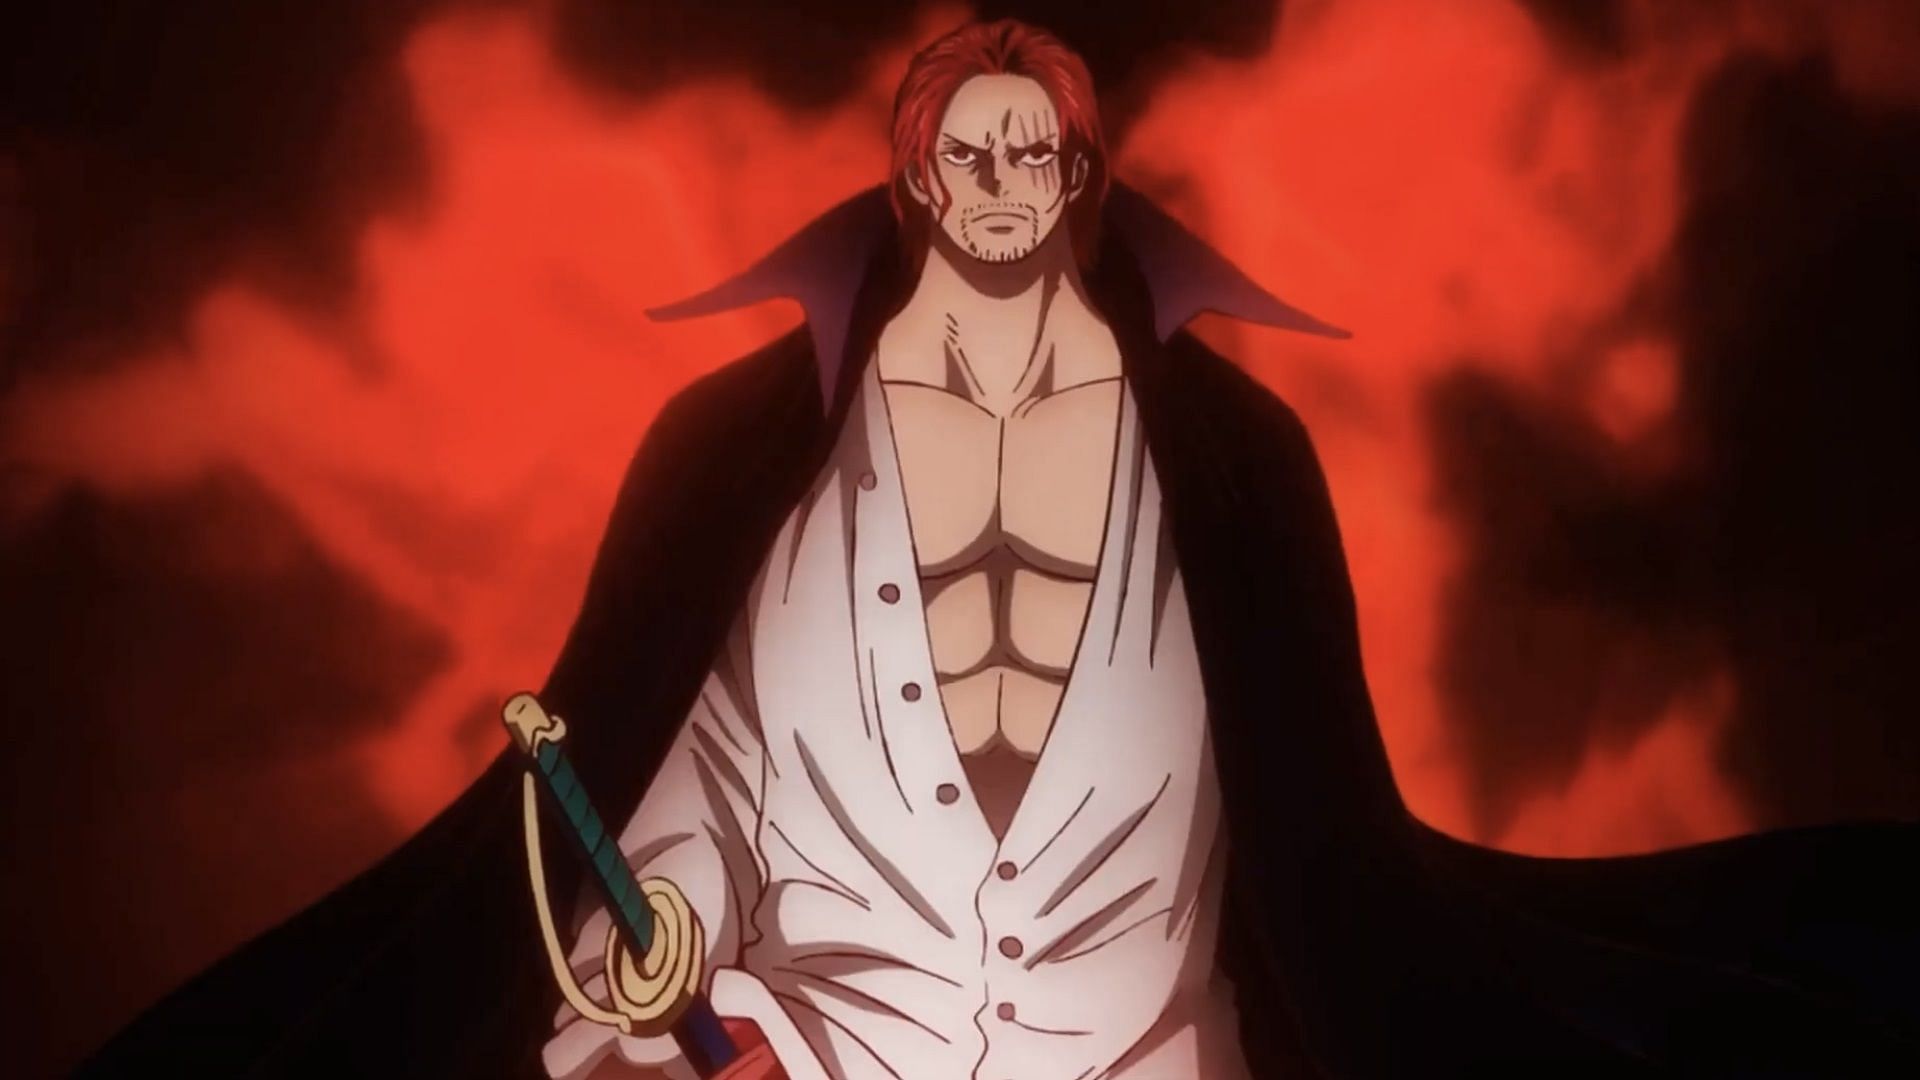 Kid stood absolutely no chance against Shanks (Image via Toei Animation, One Piece)